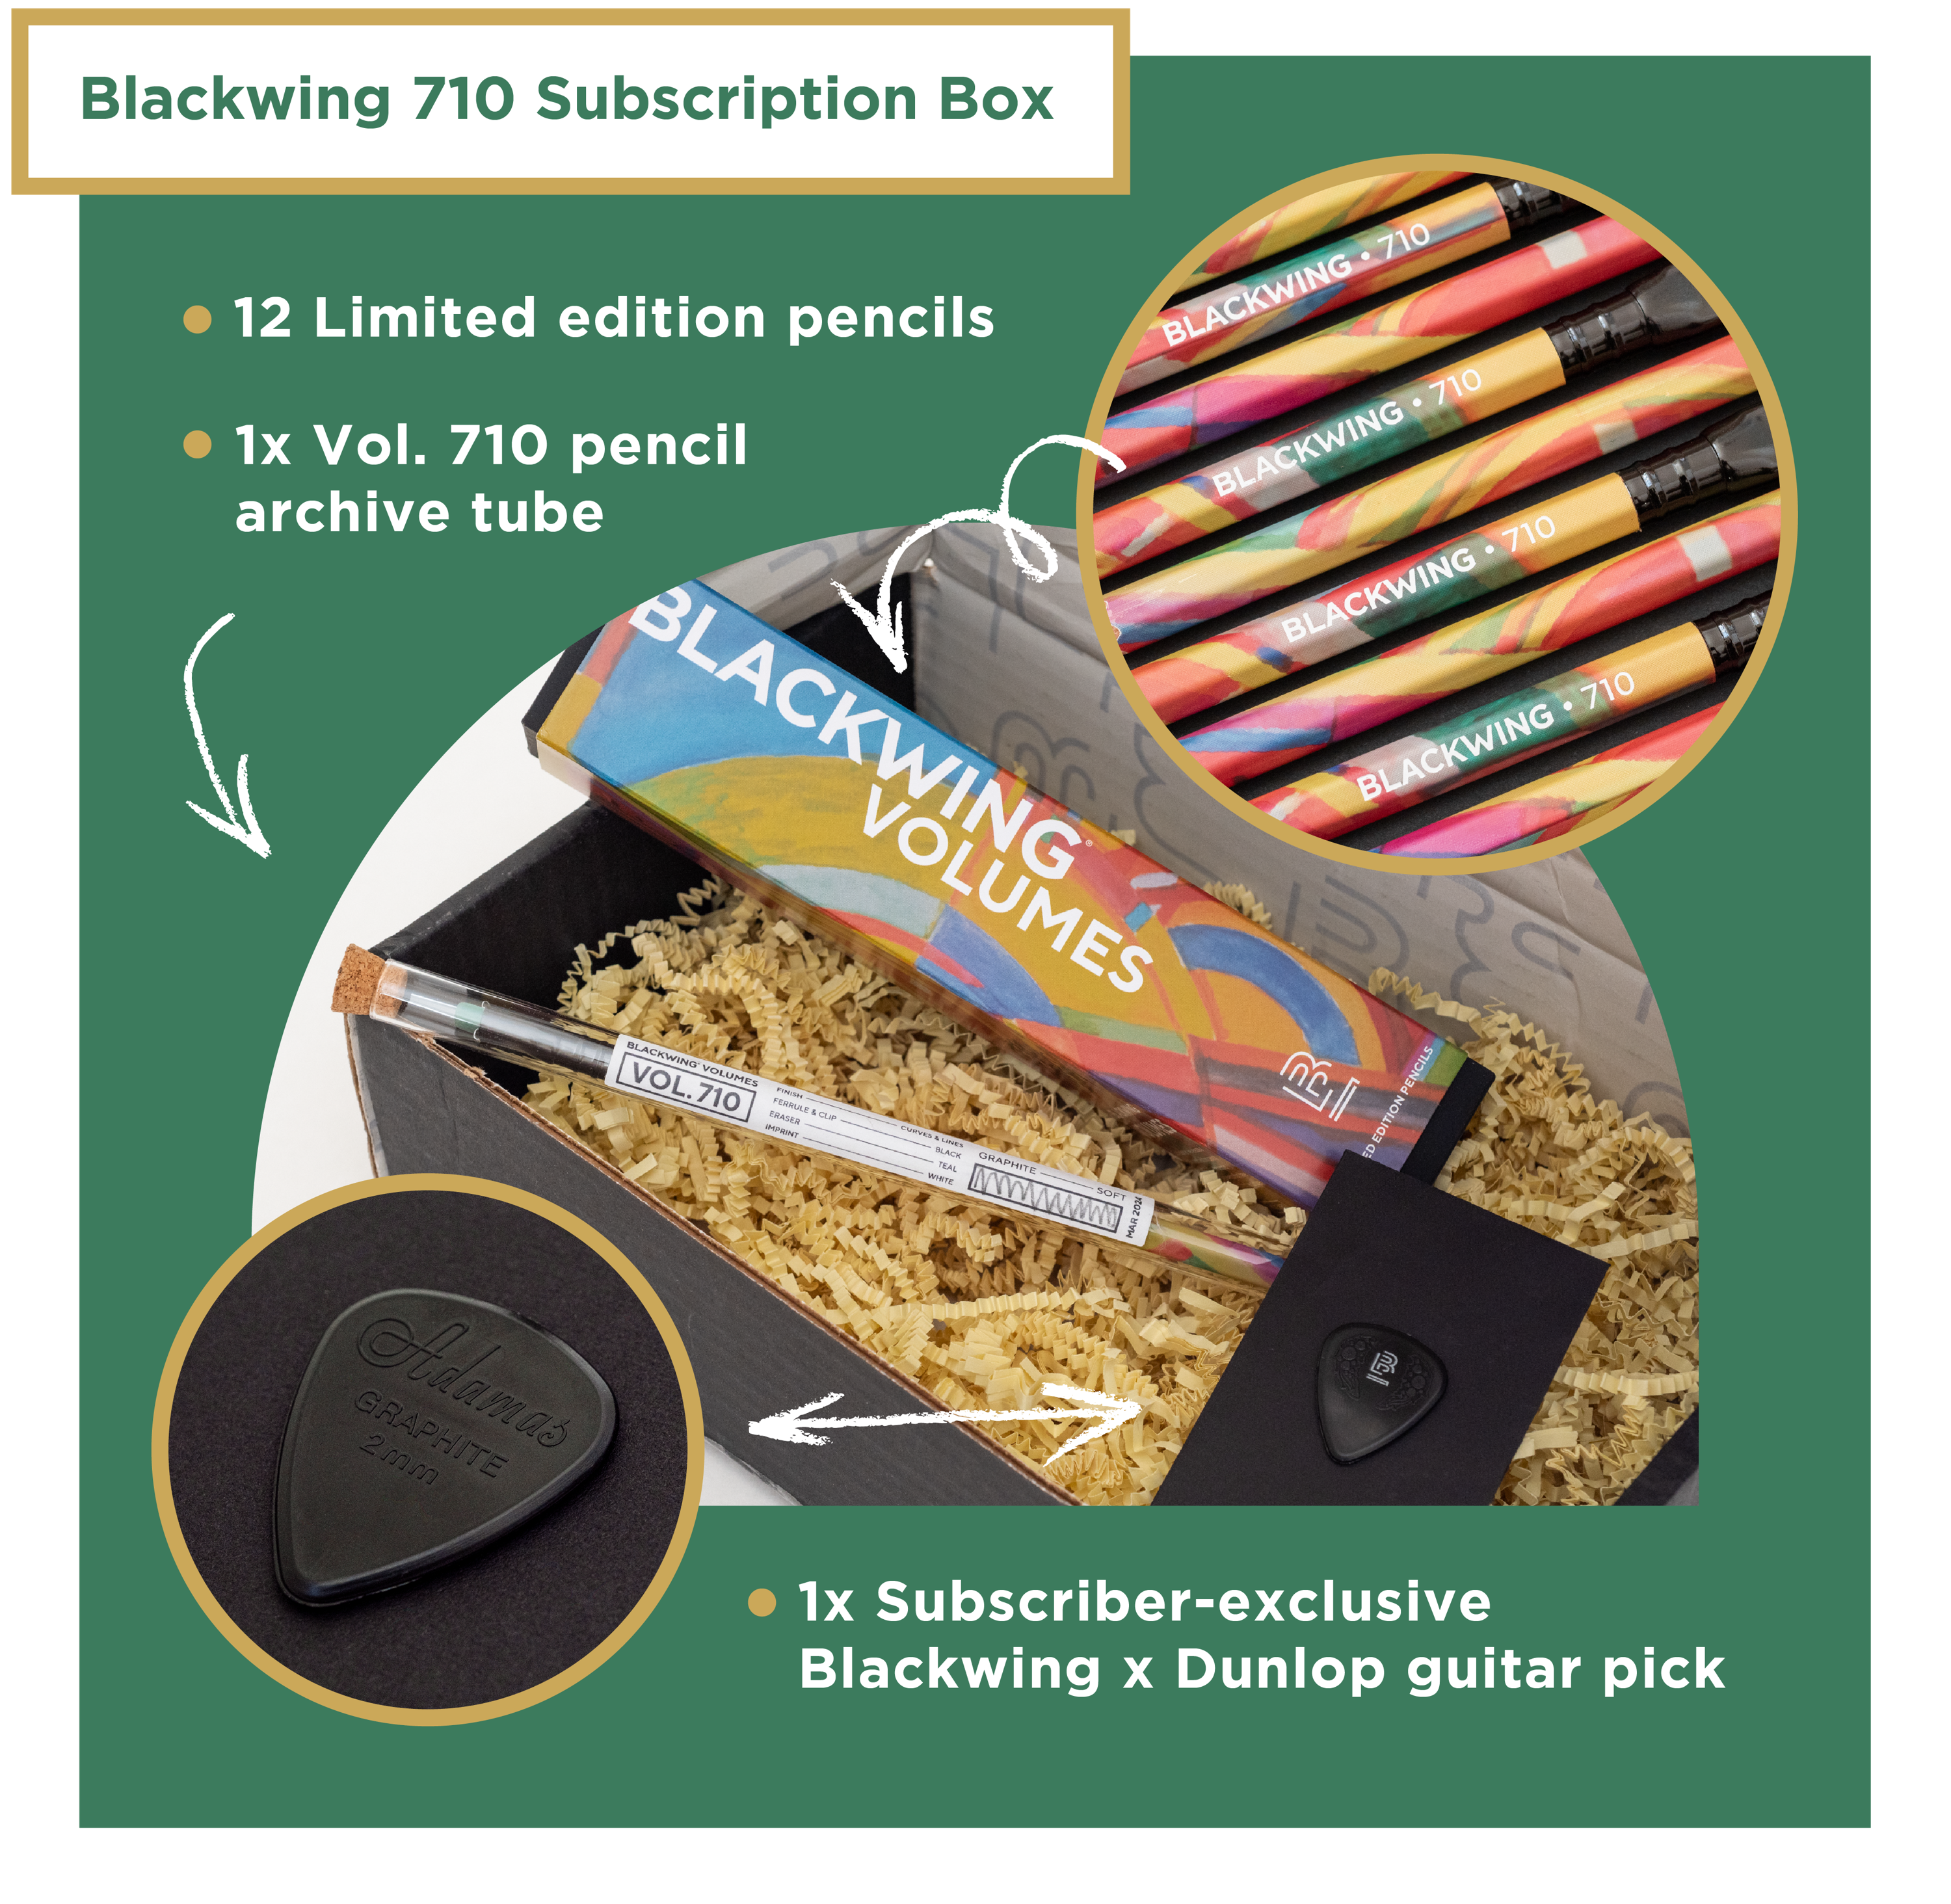 Content of the Blackwing 710 Subscription Box